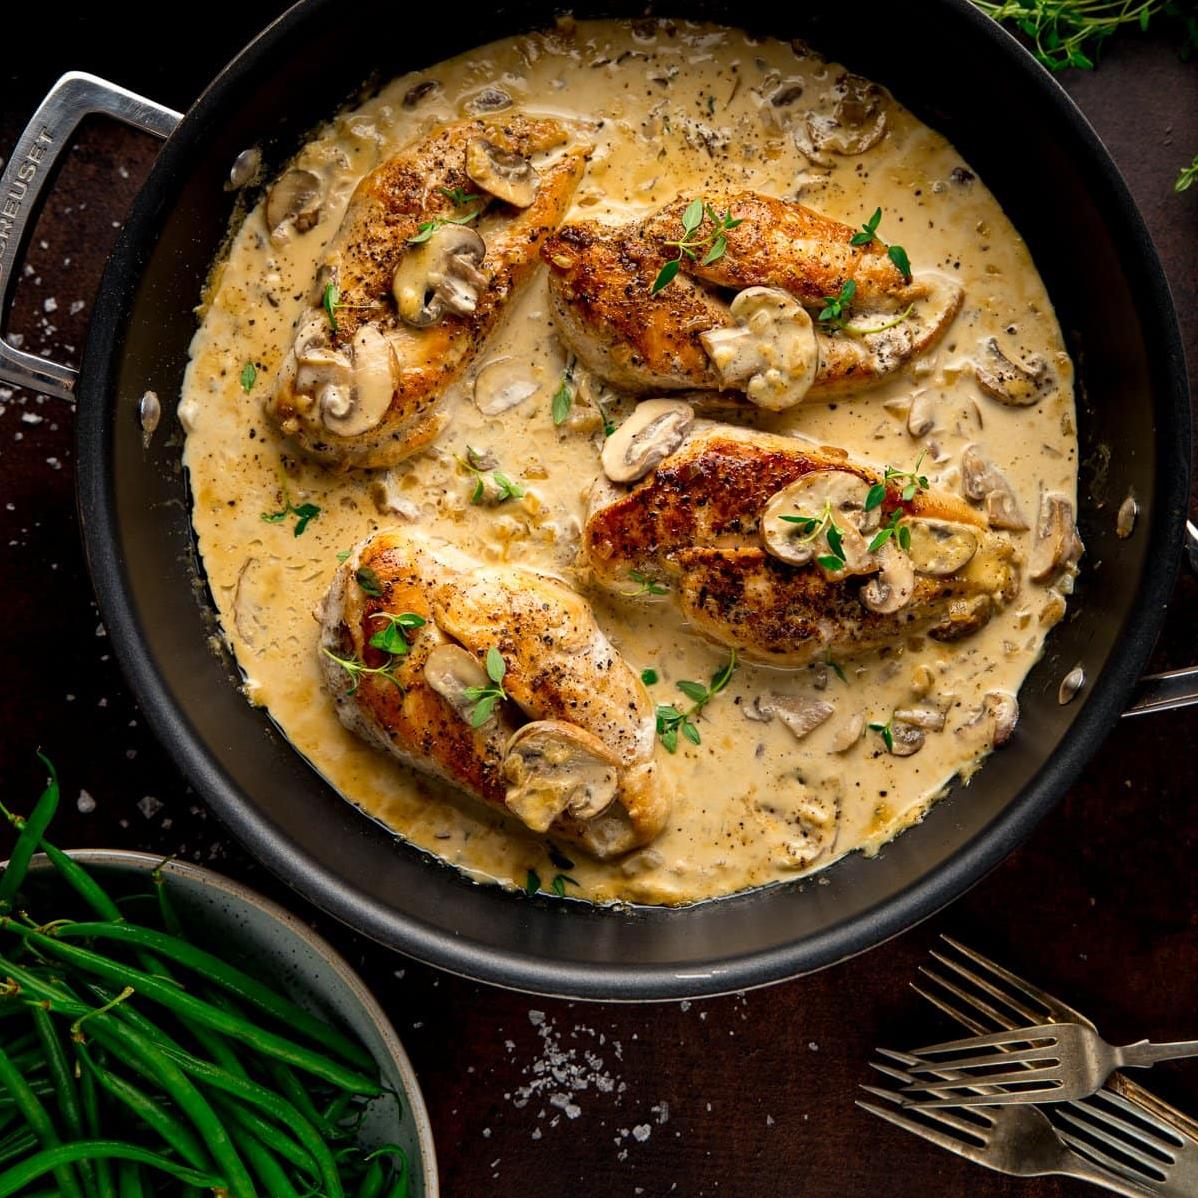  Simple yet sophisticated, chicken with white wine sauce is perfect for date night in.